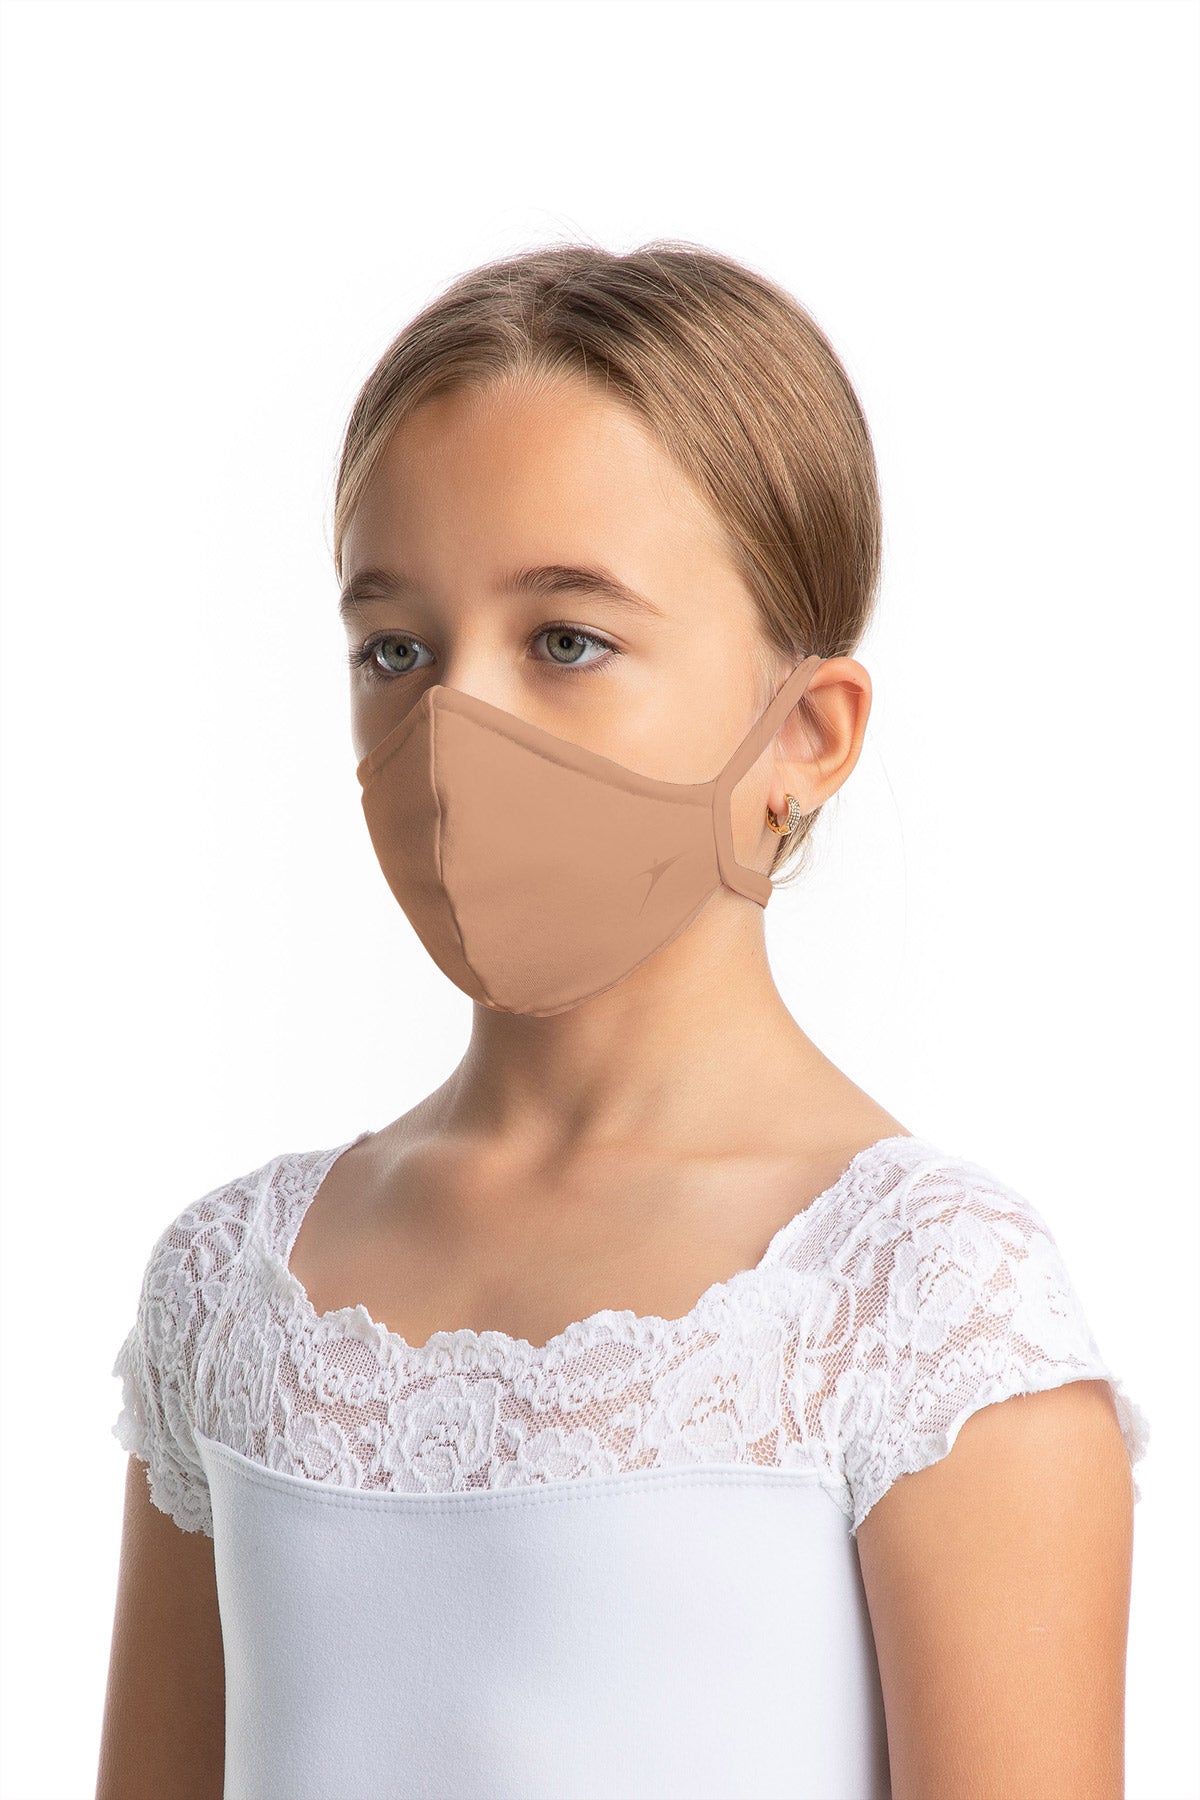 Child Unisex Fitted Face Mask With Earloops - SD1663